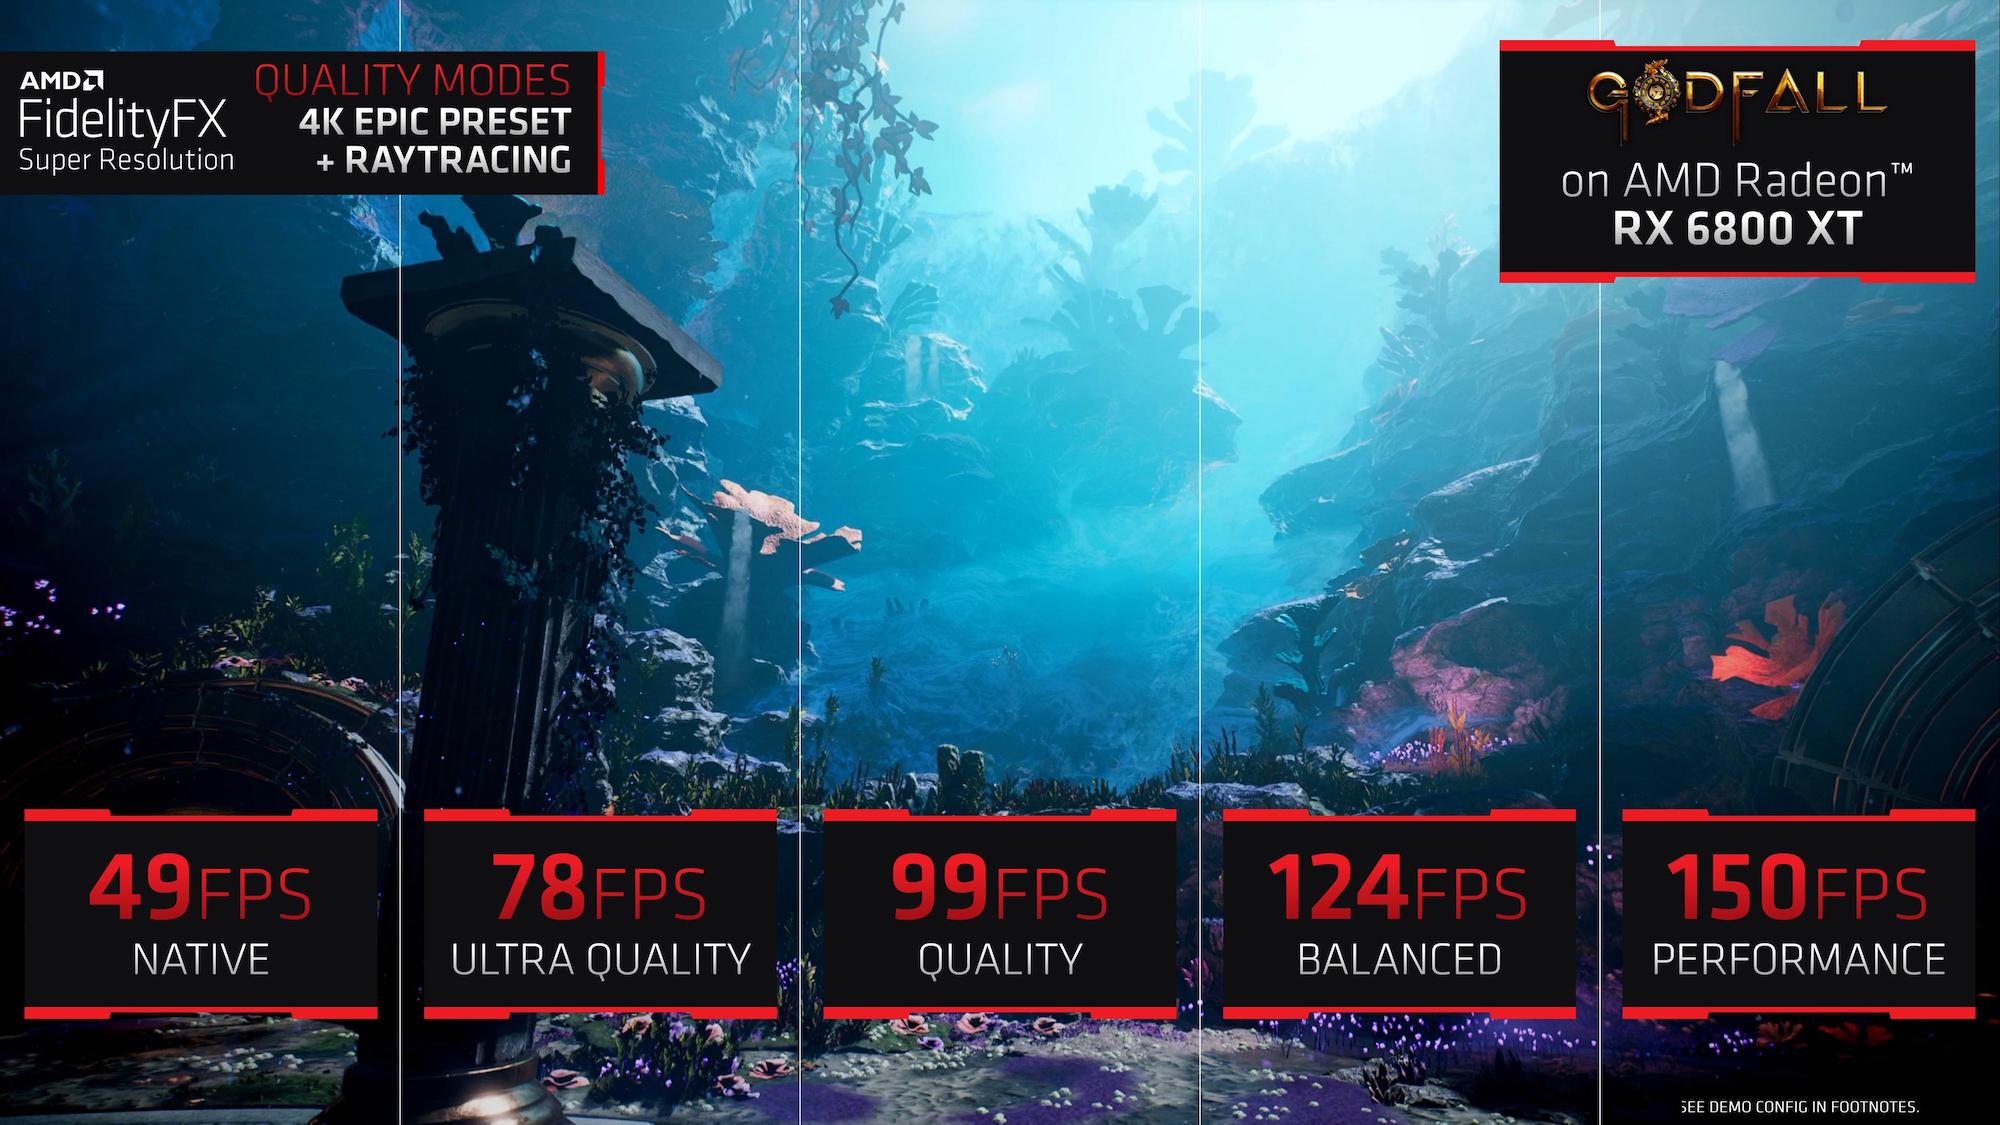 Optimizing Adult Gaming Performance with AMD FidelityFX Super Resolution